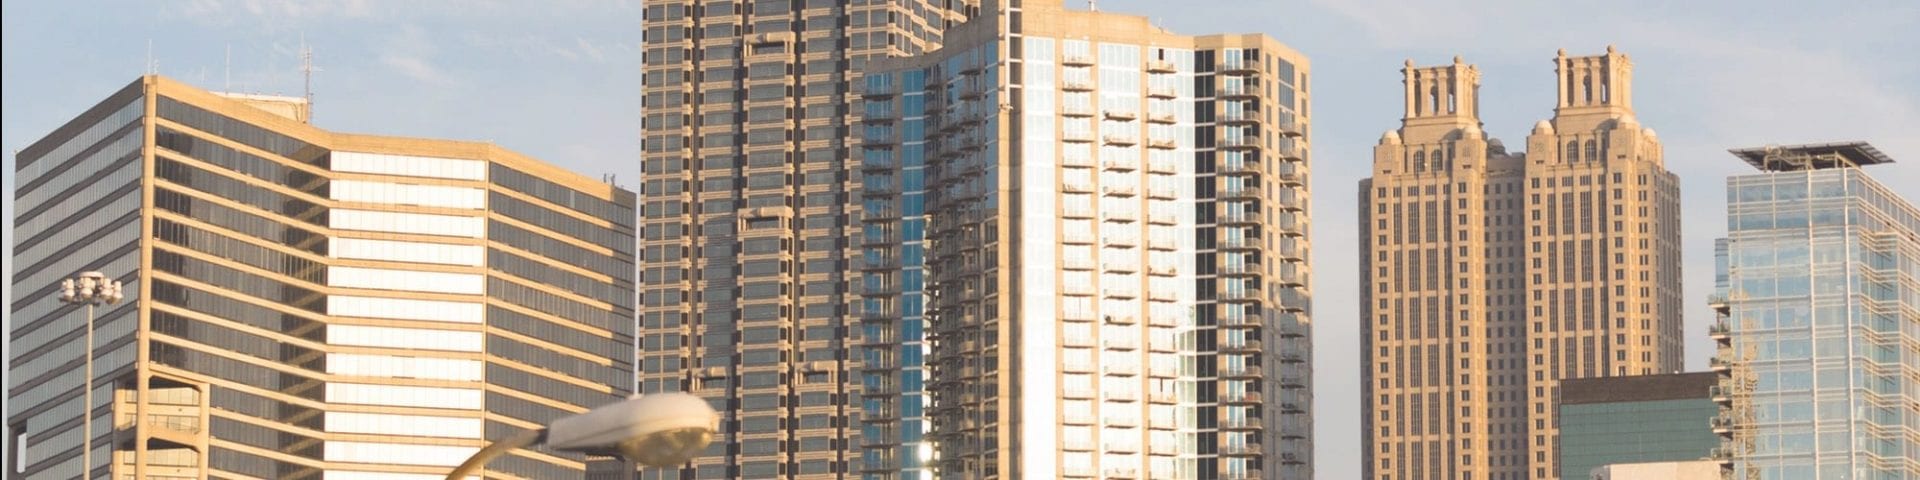 Atlanta Indoor Air Quality (IAQ) Surveys in High-Rise Commercial/Residential Buildings